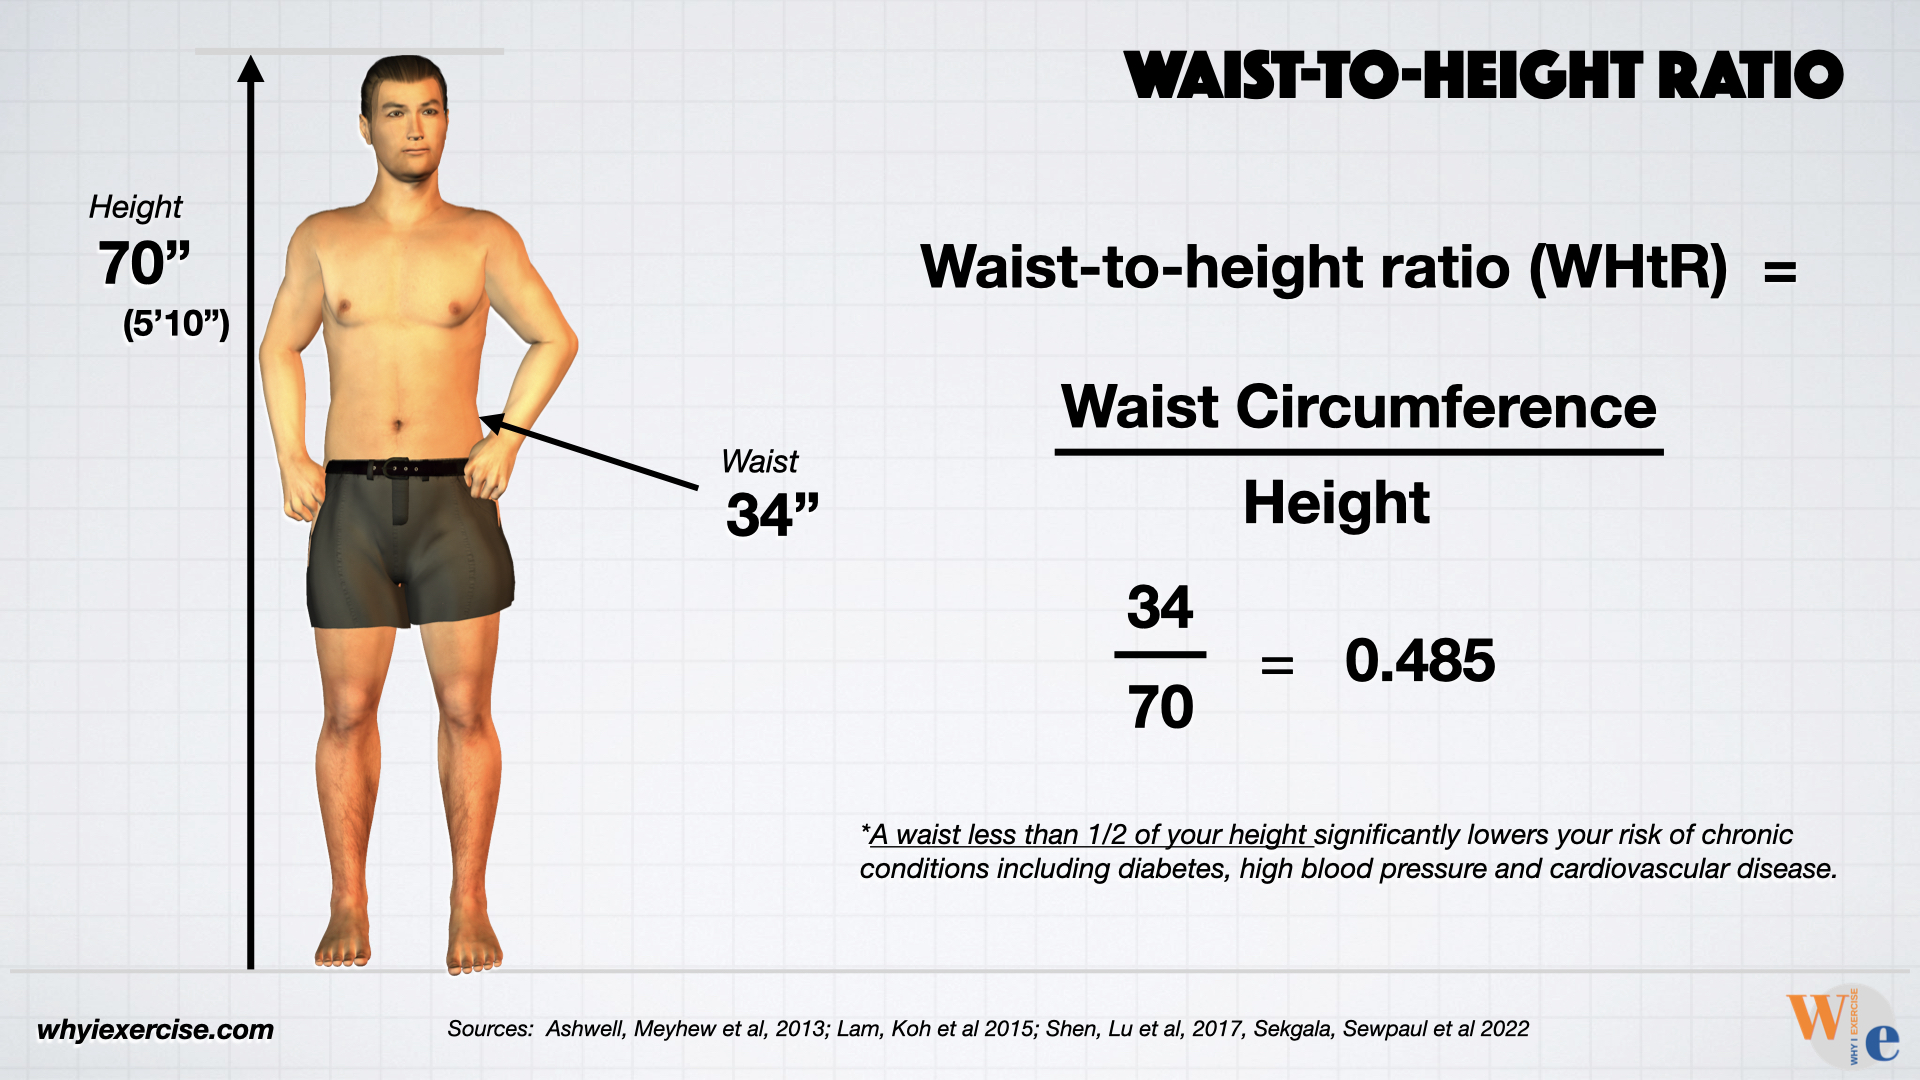 Your waist-to-hip ratio matters more than your weight